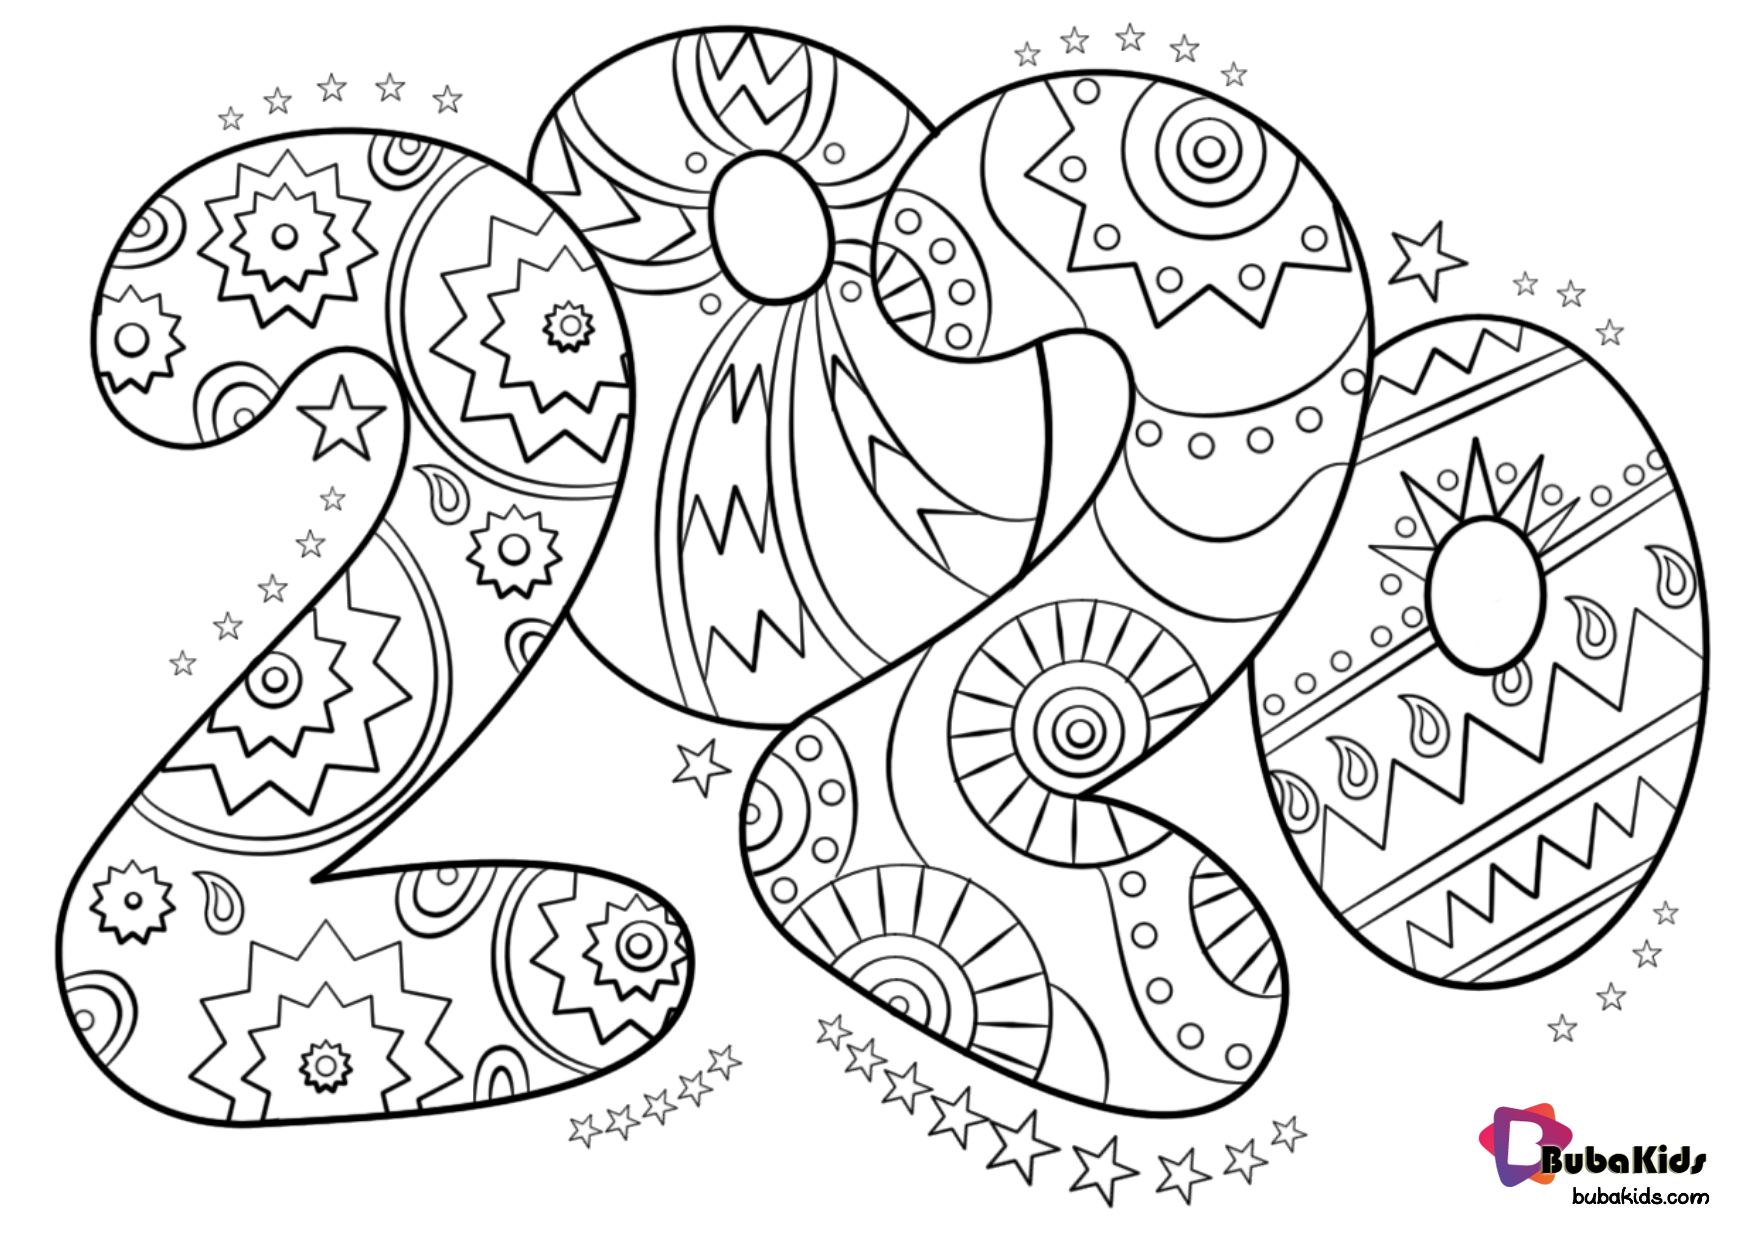 Happy new year 2020 coloring page bubakids.com Wallpaper